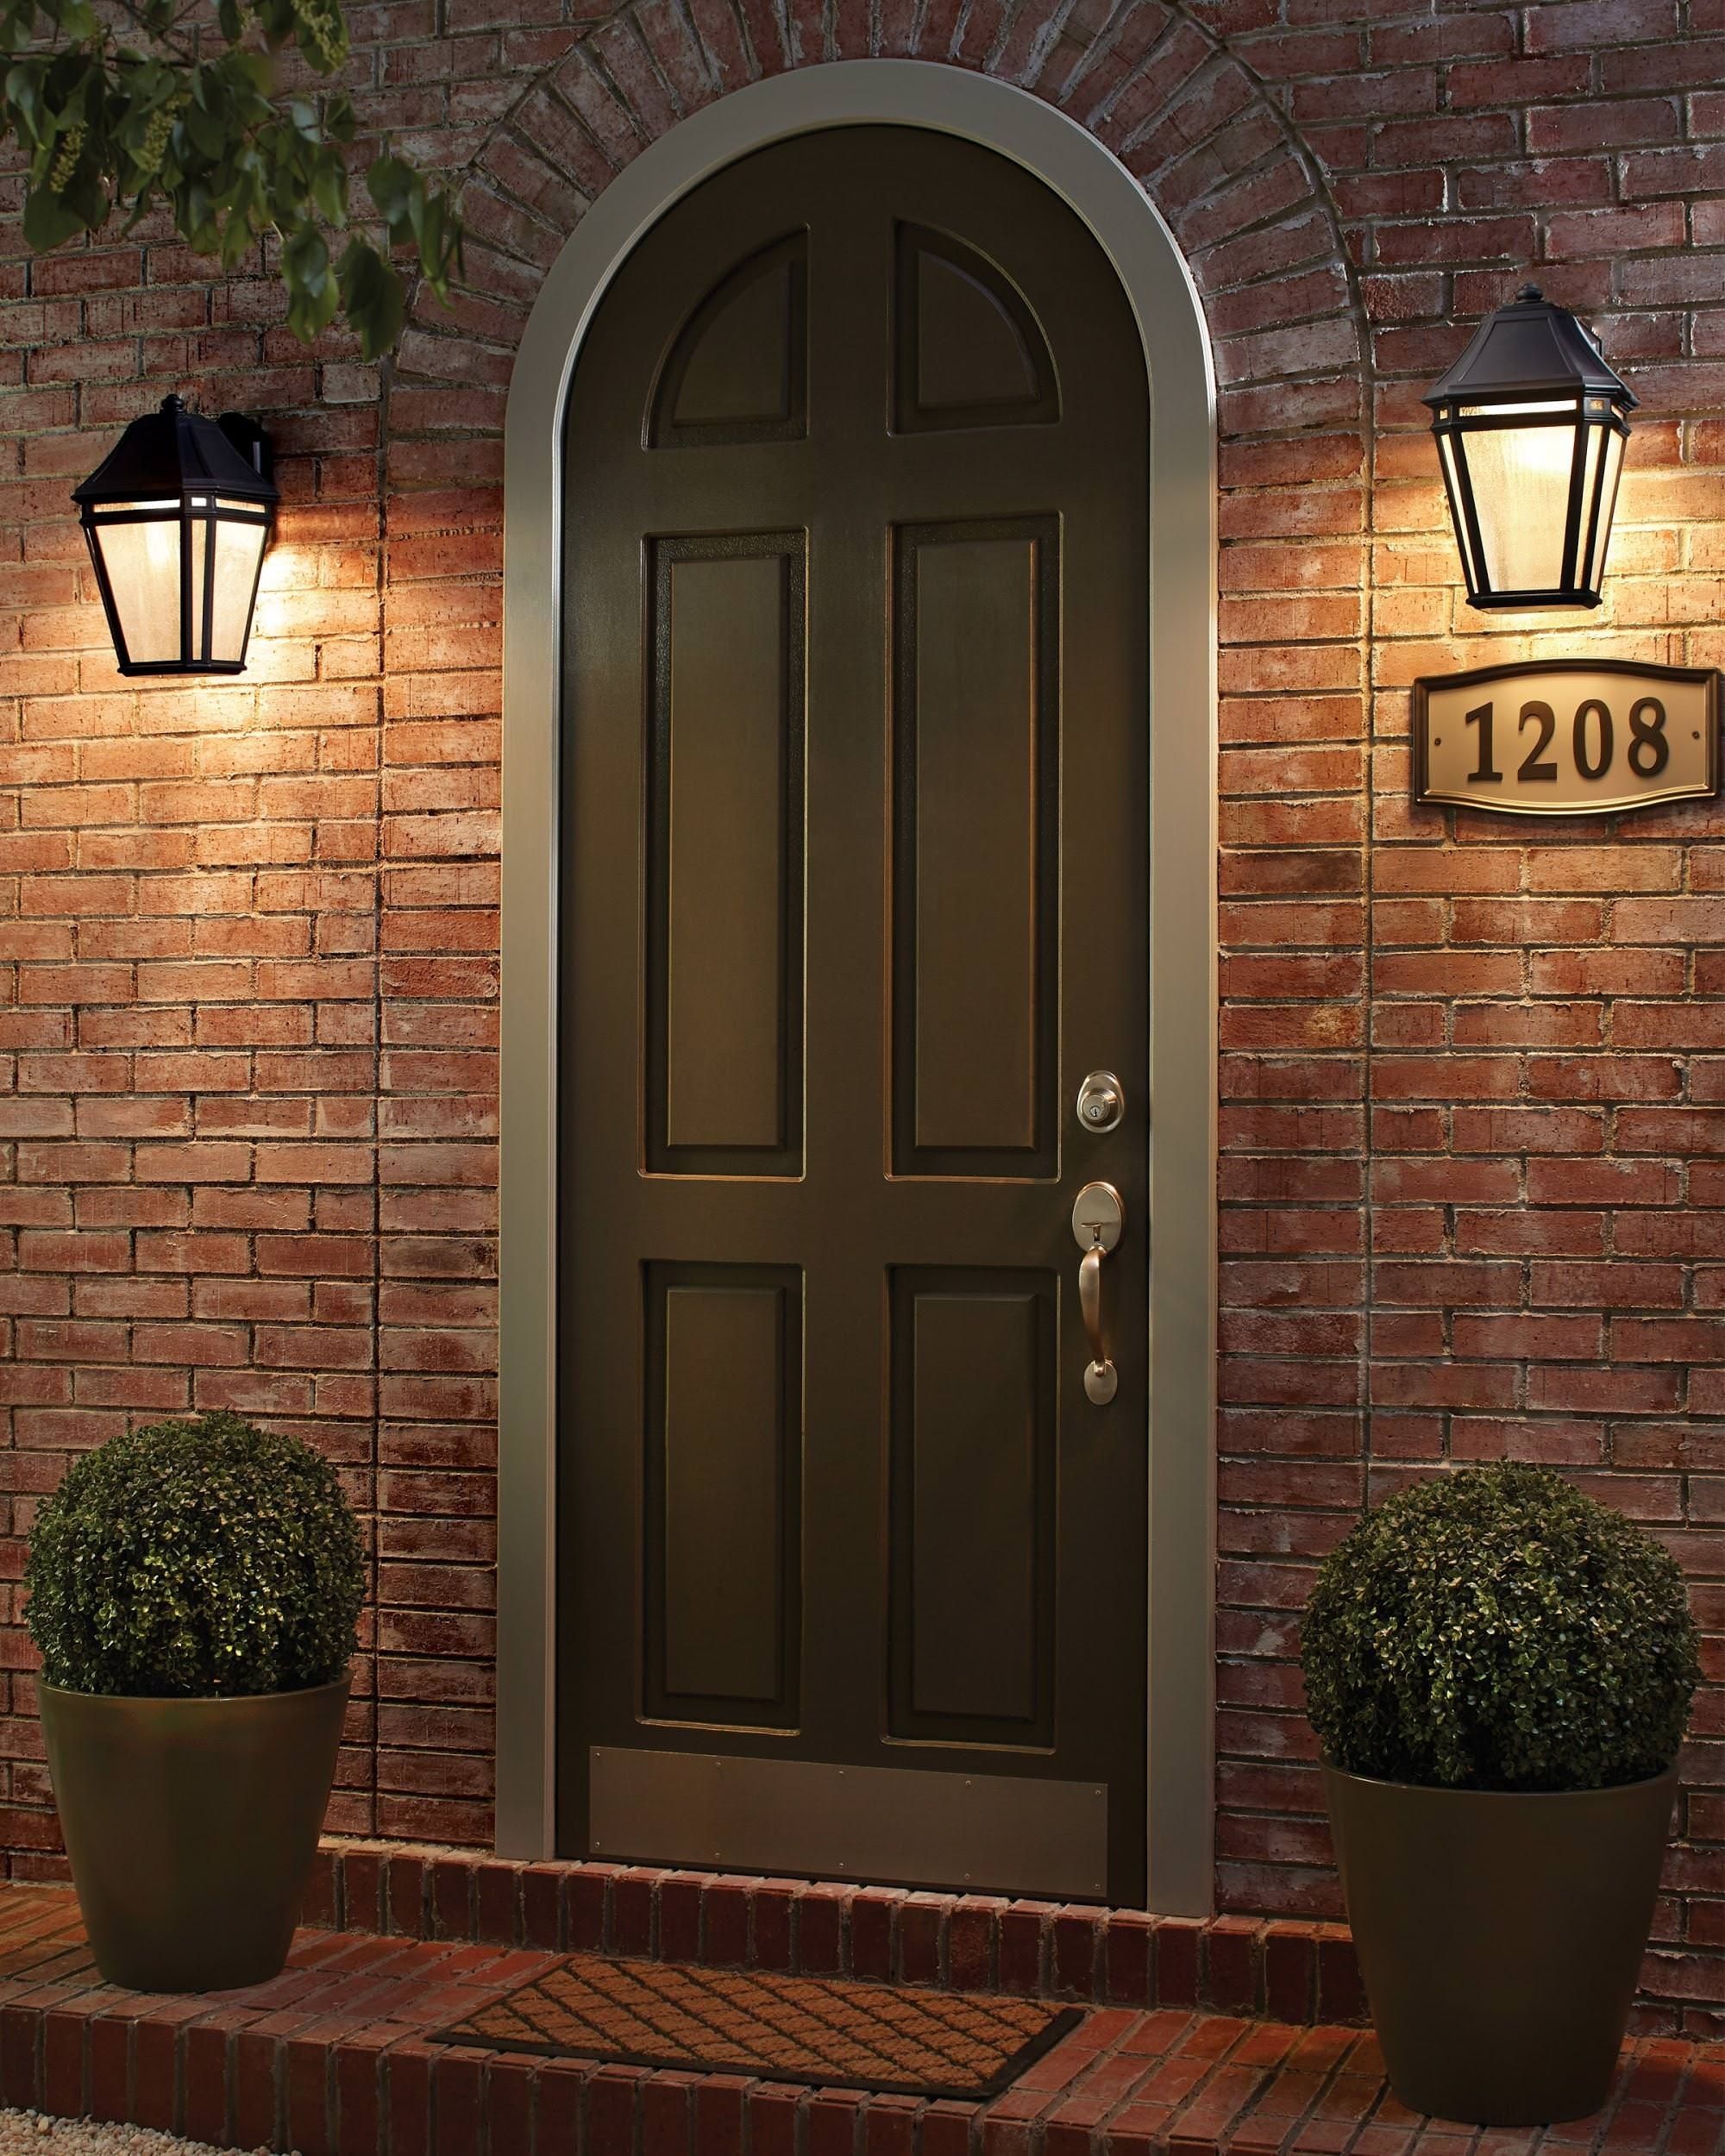 15 Different Outdoor Lighting Ideas For Your Home (all Types) Throughout Outdoor Lanterns For Garage (View 6 of 20)